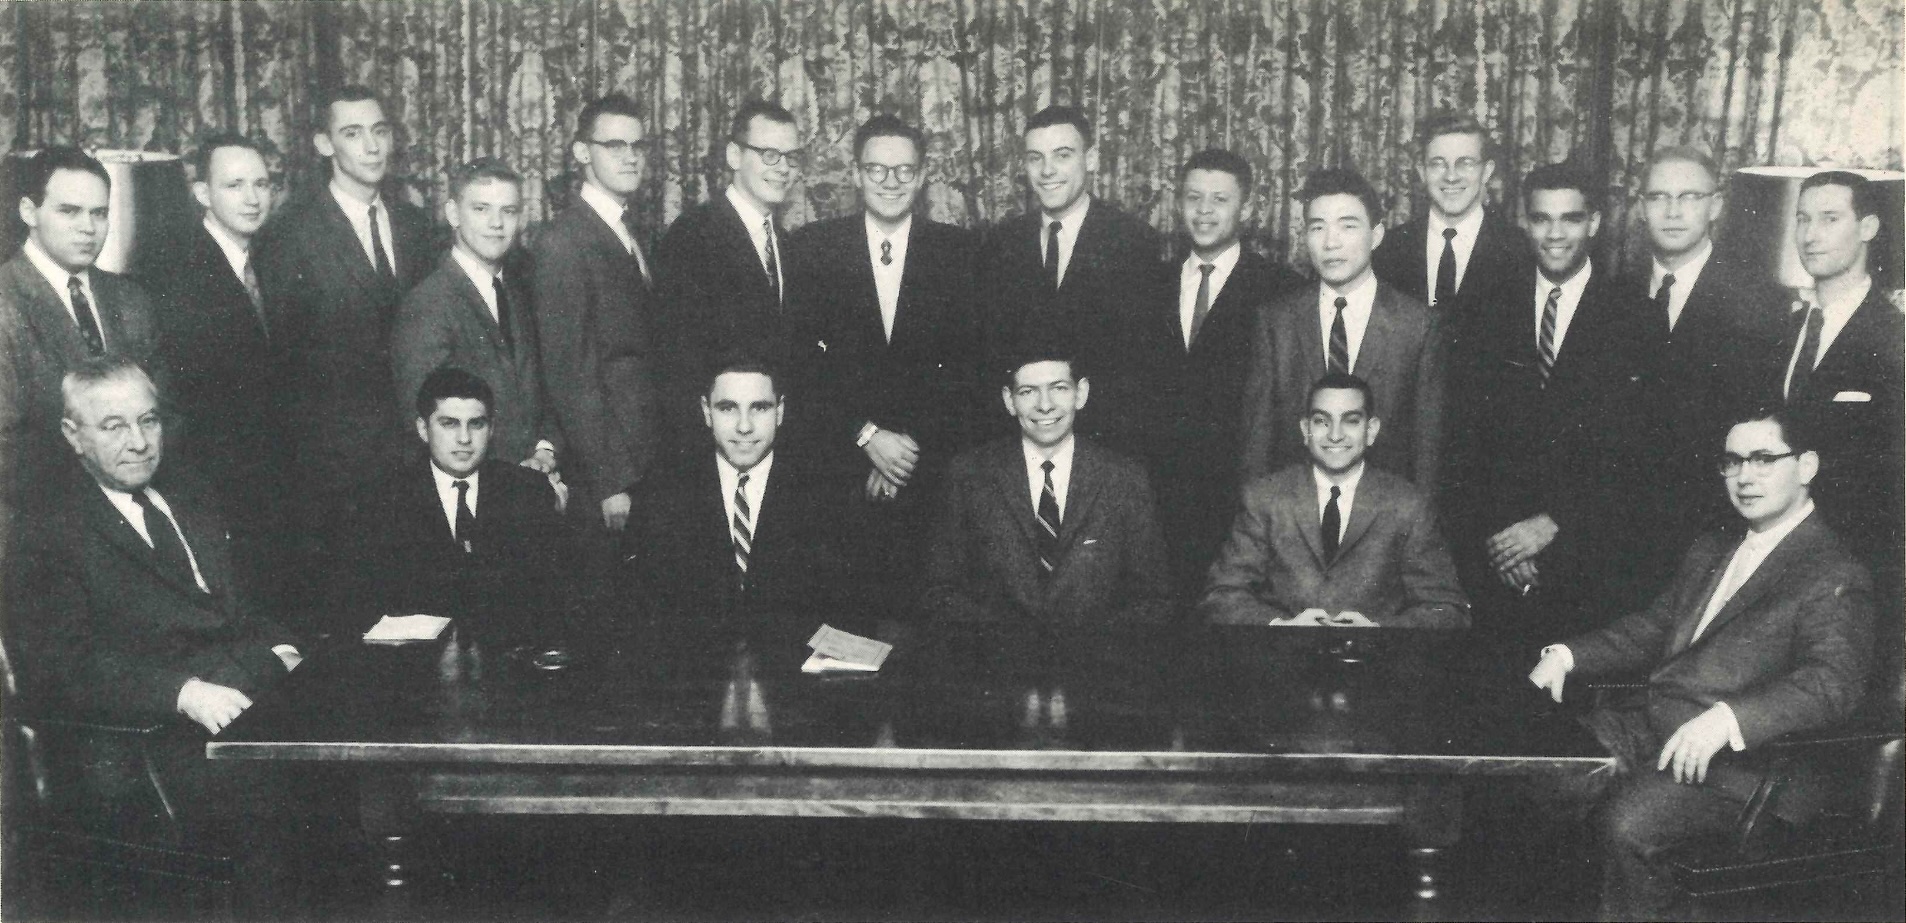 Coshburn with members of Alpha Chi Sigma, the professional chemistry and chemical engineering fraternity, in the back row, sixth from right